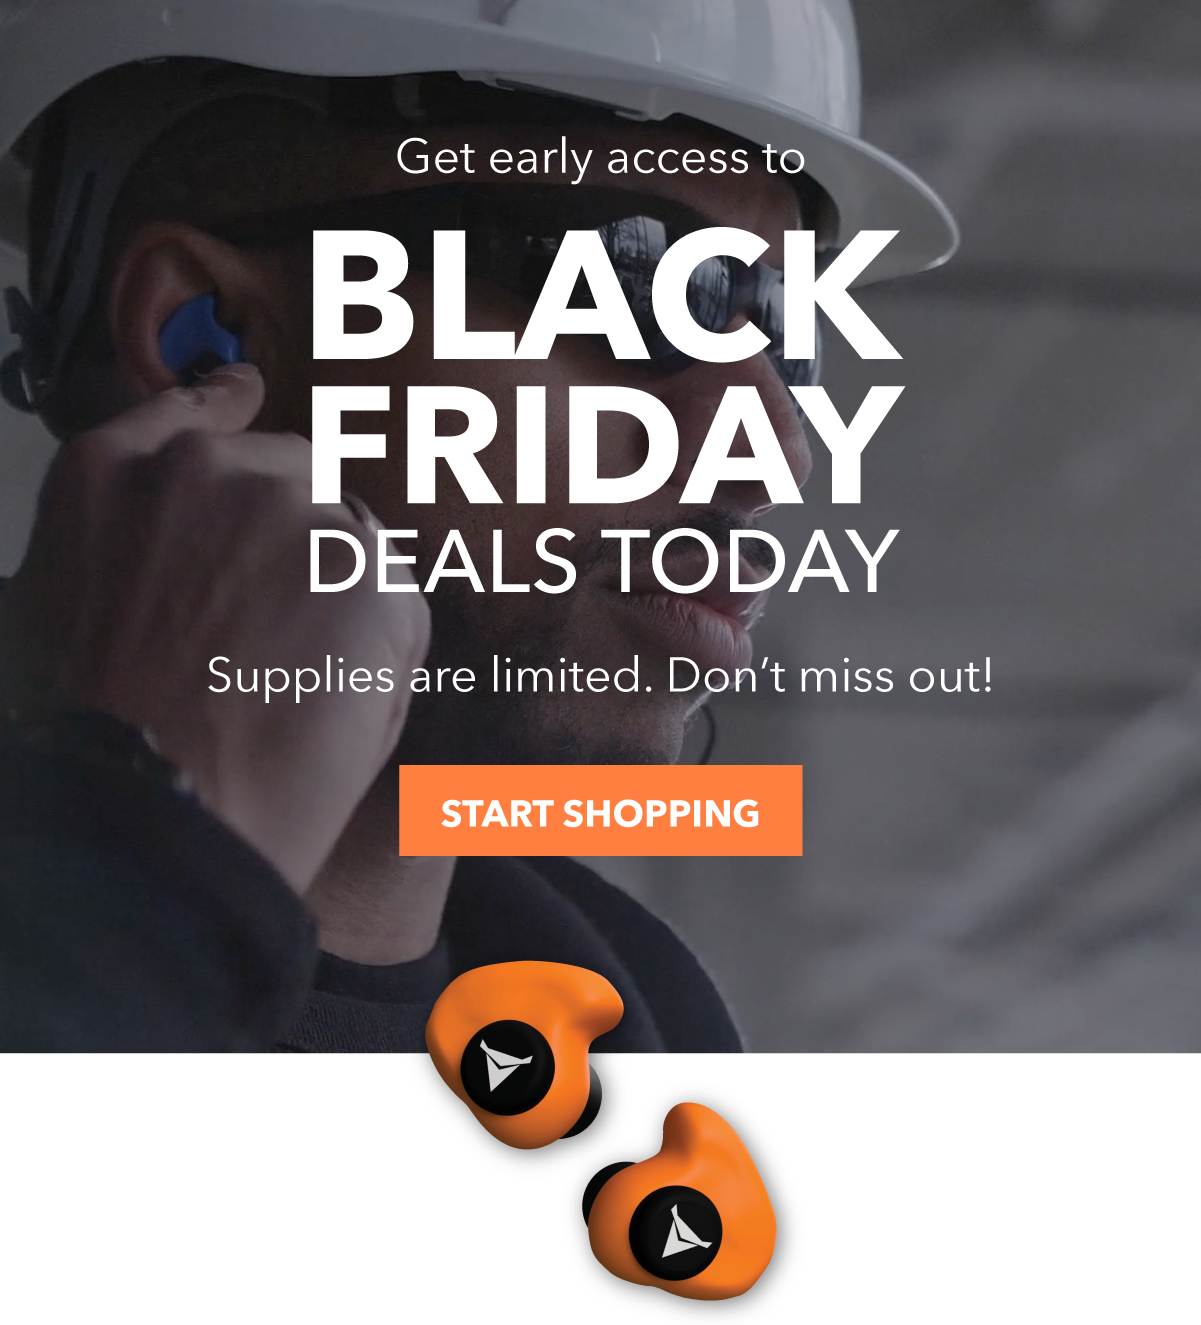 Get early access to BLACK FRIDAY DEALS TODAY! Supplies are limited. Don''t miss out!